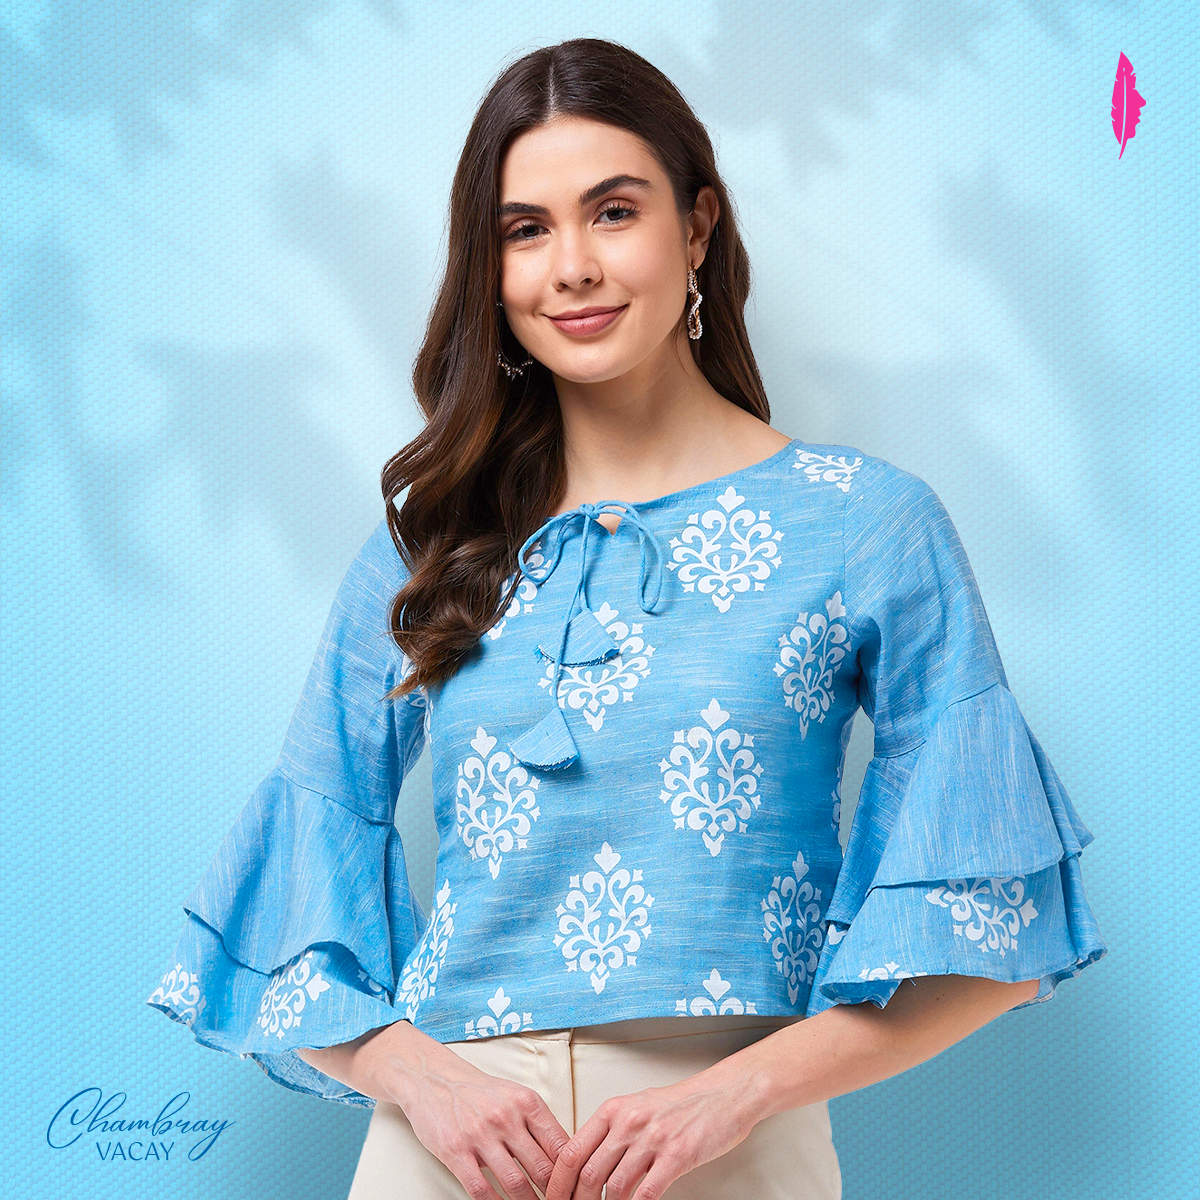 Women's Block Printed Chambray Top With Bell Sleeves - Pannkh